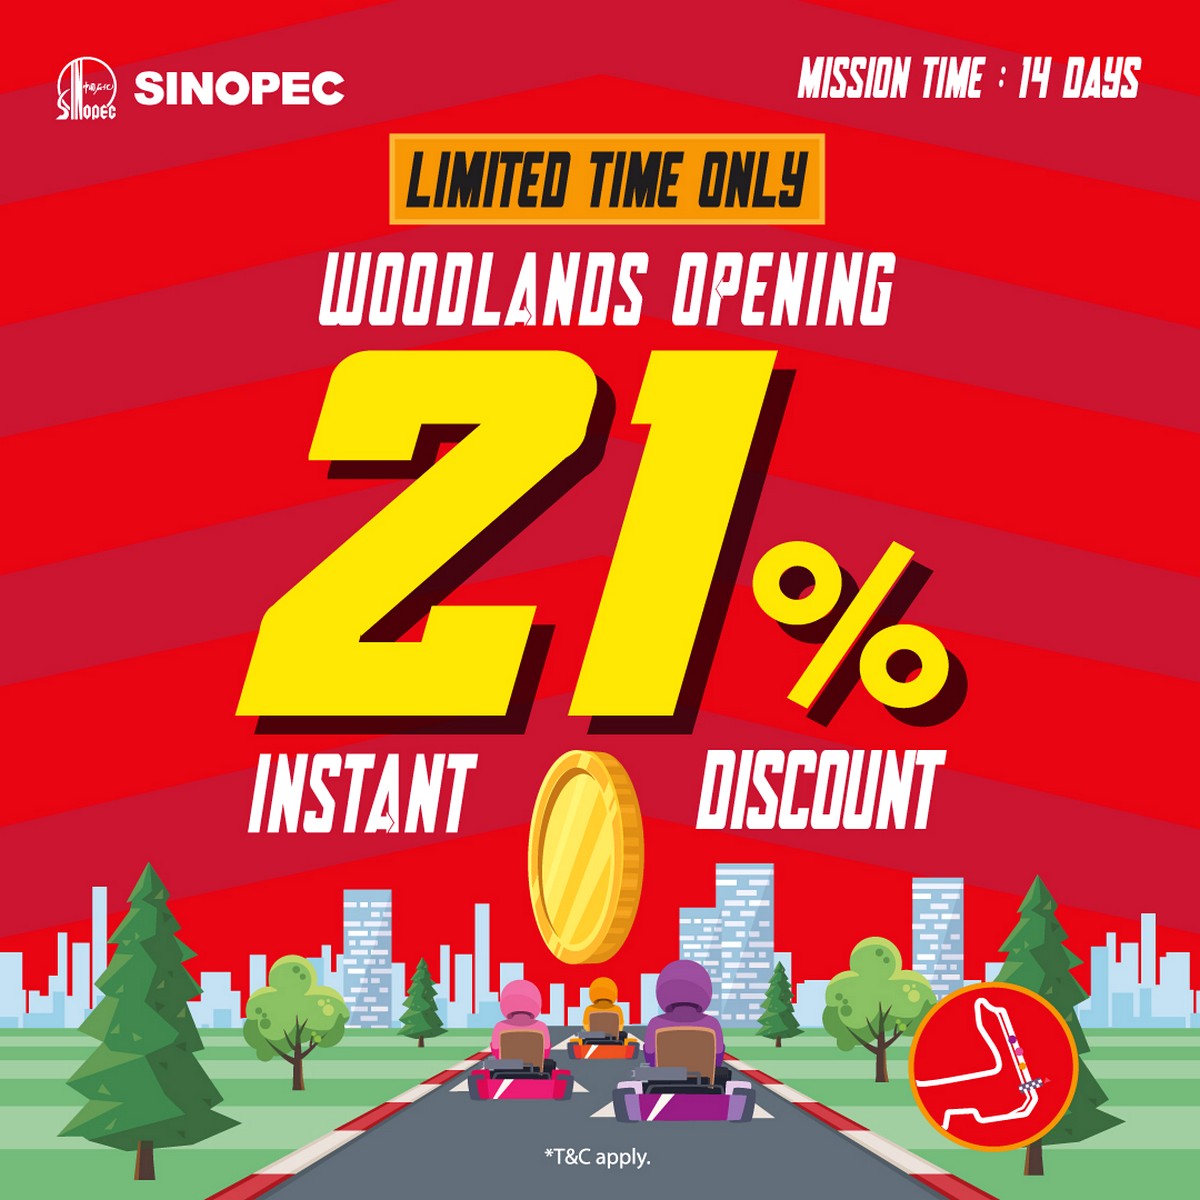 Sinopec-Opening-Promotion-woodlands-2021-Singapore-Petrol-Offers 21 May-3 Jun 2021: Sinopec at Woodlands New Petrol station Promotion! 21% OFF Instant opening Exceptional Rebate on their Opening Offers